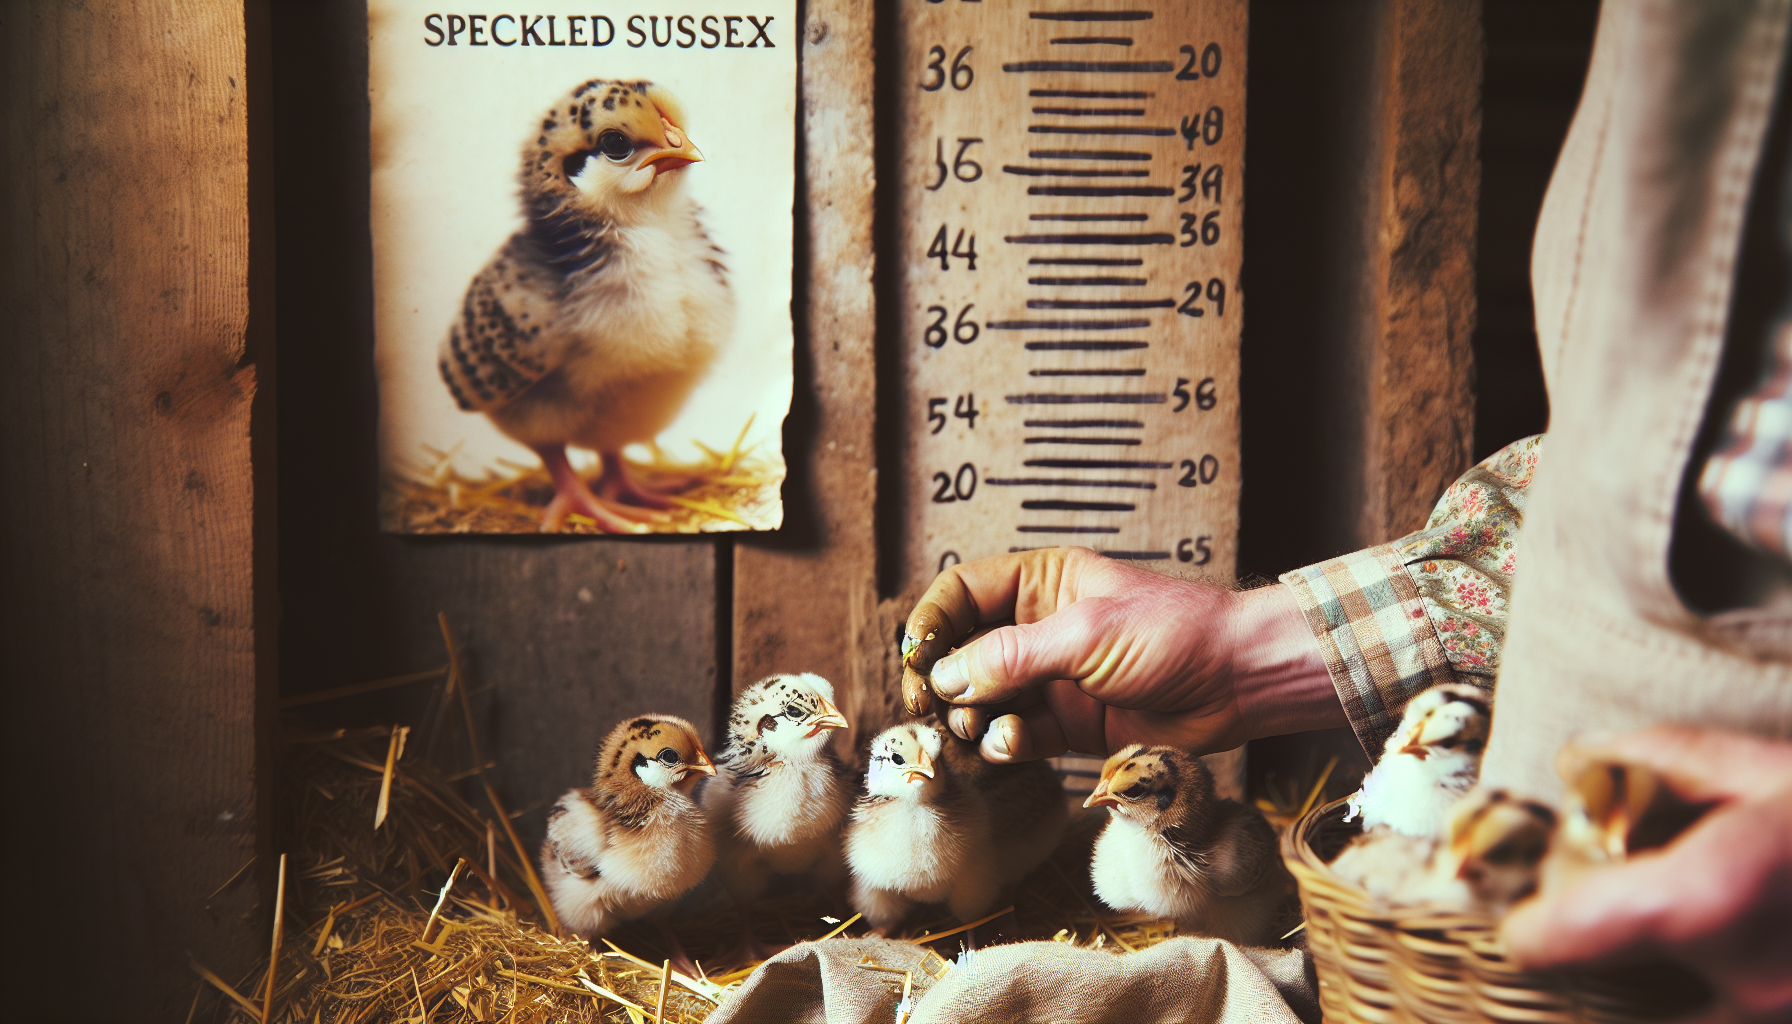 Caring for adorable Speckled Sussex chicks